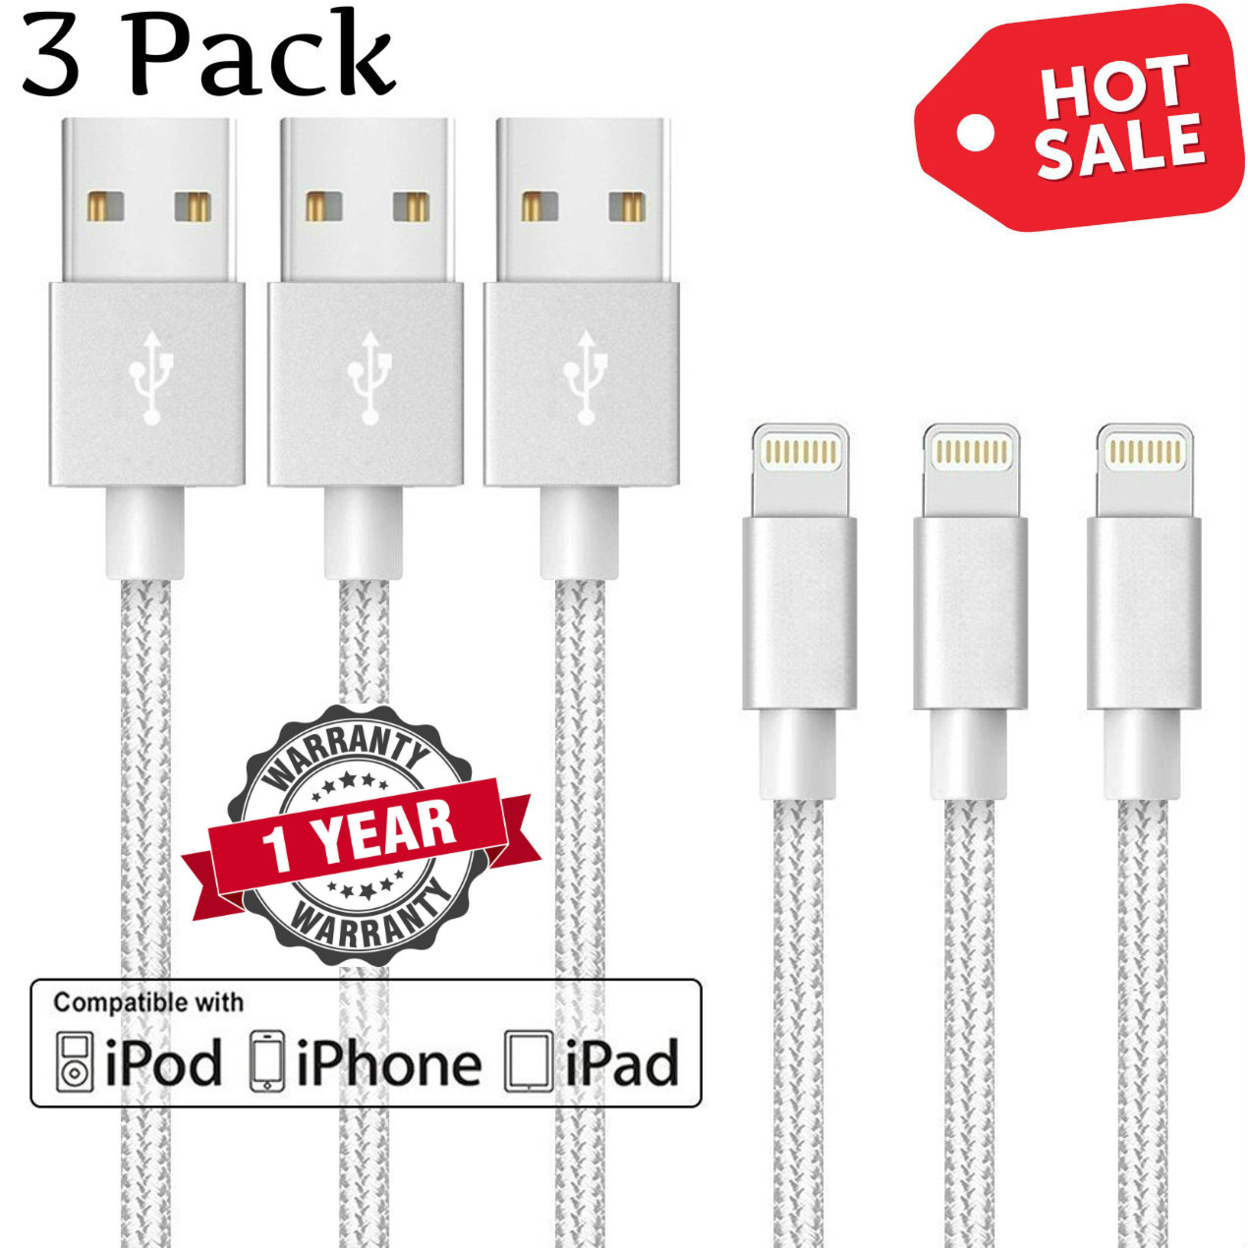 6 FT Heavy Duty Braided 8 Pin USB Charger Cable Cord For Apple IPhone - White, 1